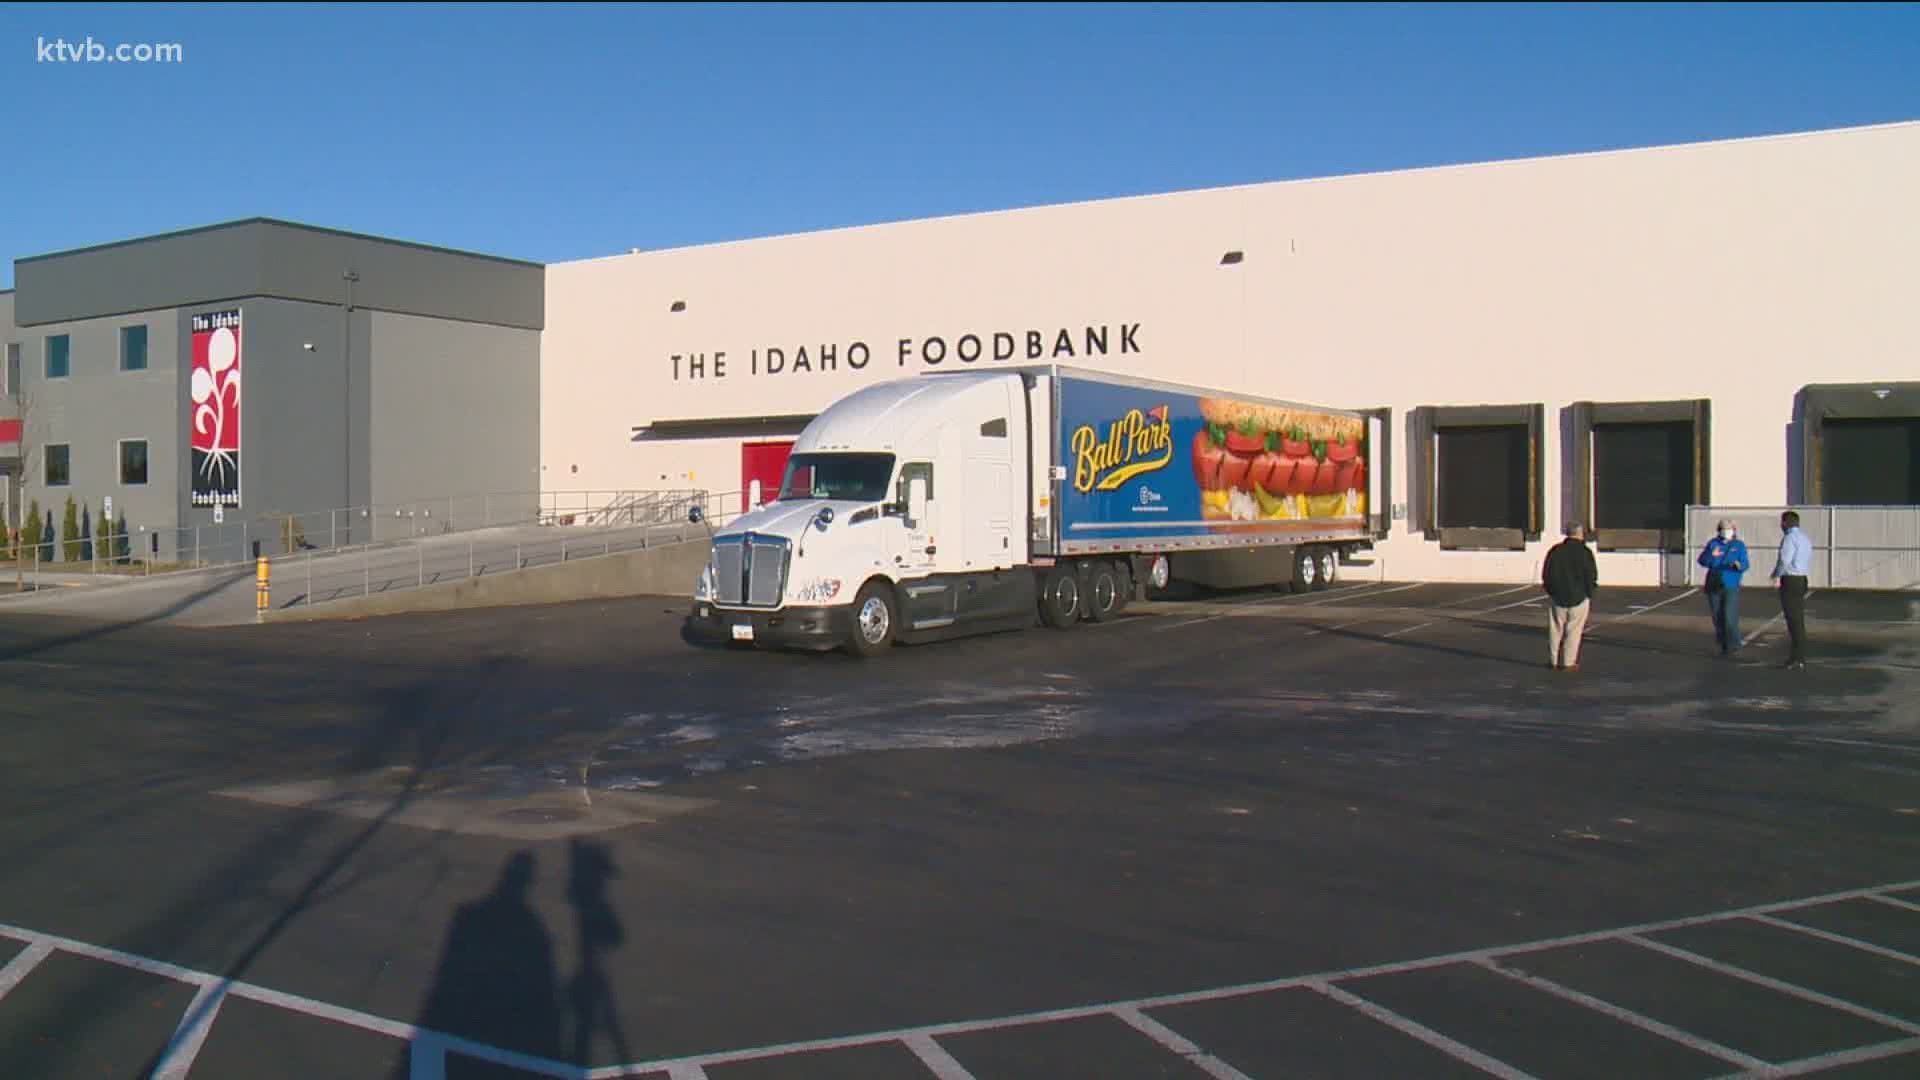 Tyson Foods delivered part of a huge donation of chicken Thursday to the Idaho Foodbank in Meridian.